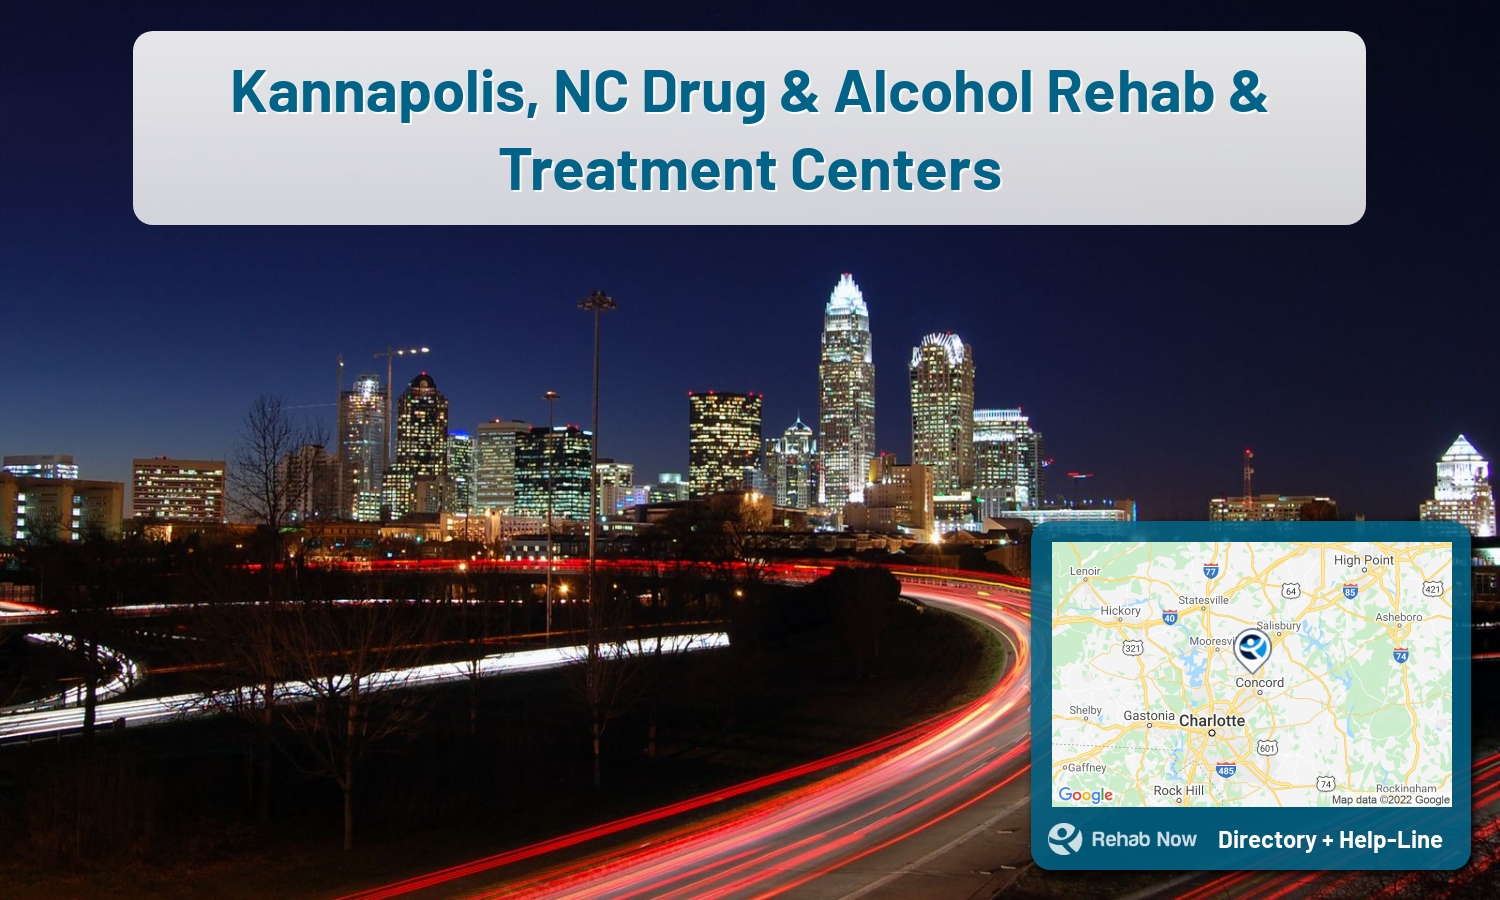 Kannapolis, NC Treatment Centers. Find drug rehab in Kannapolis, North Carolina, or detox and treatment programs. Get the right help now!